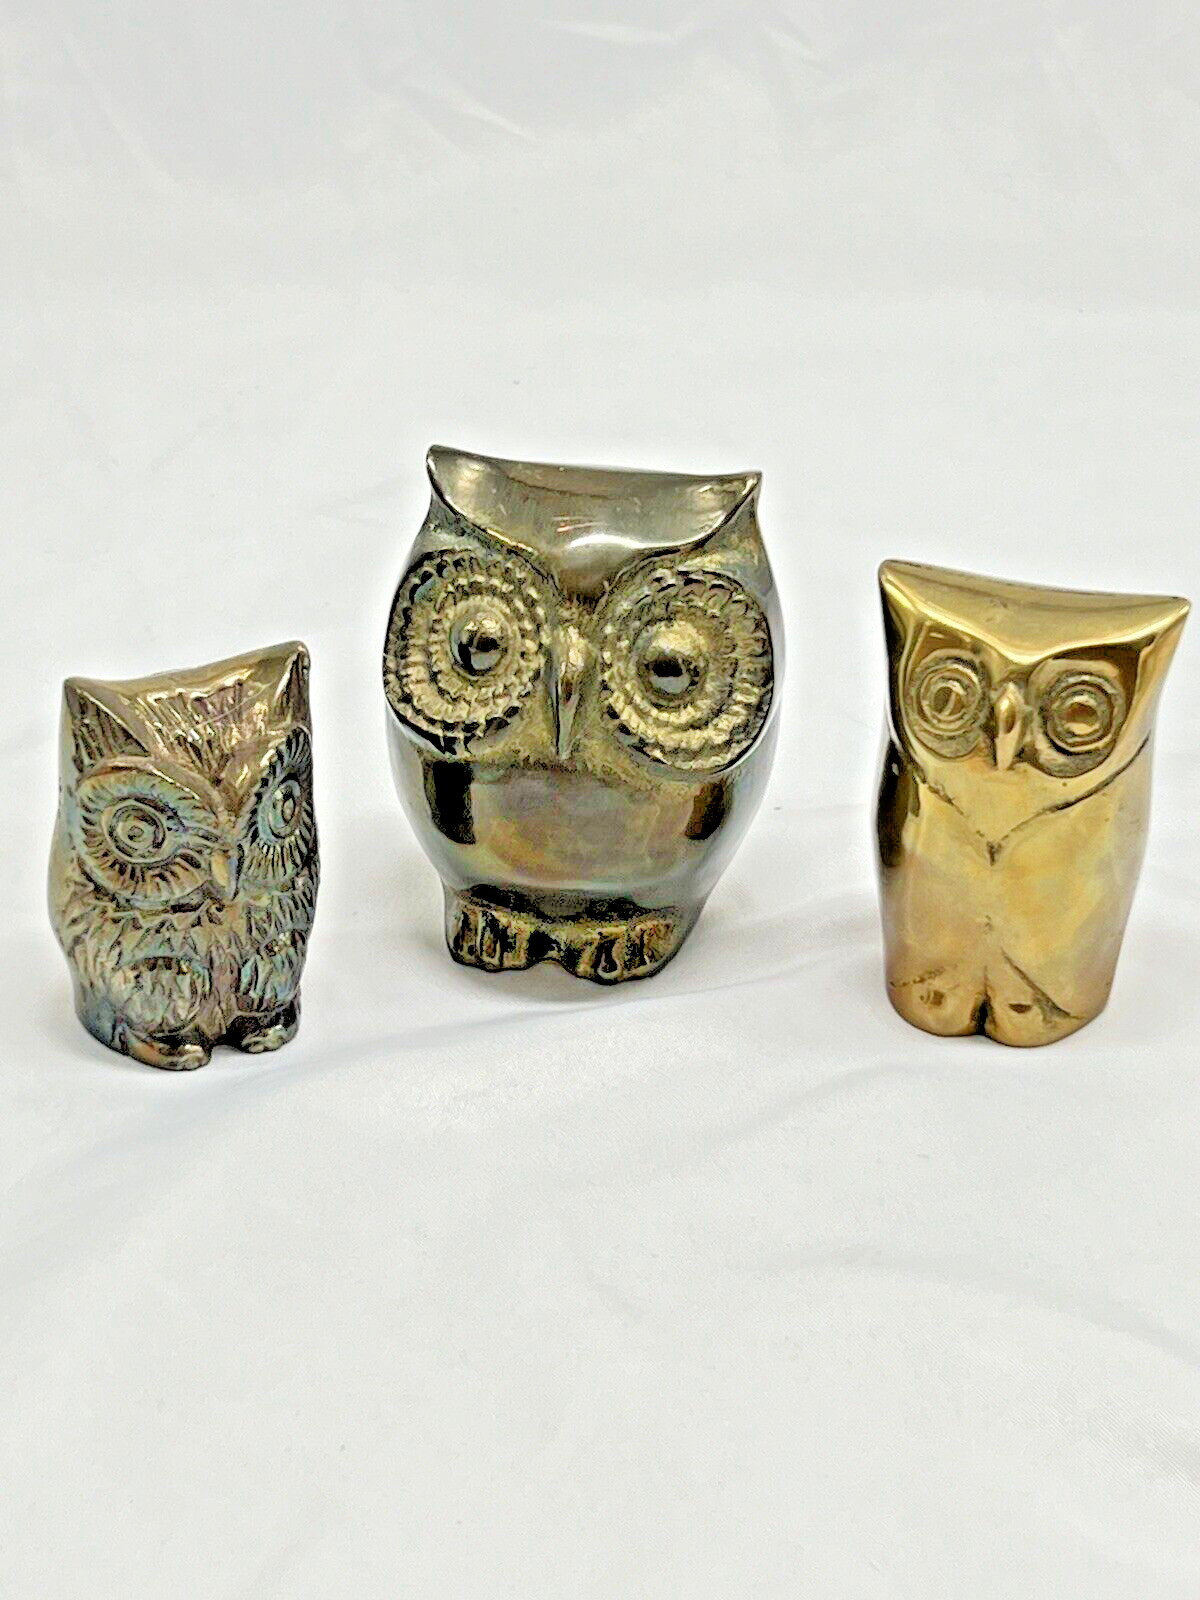 Vintage Lot of 3 Brass Owls Amsterdam & Germany 1970's - 80's SIGNED